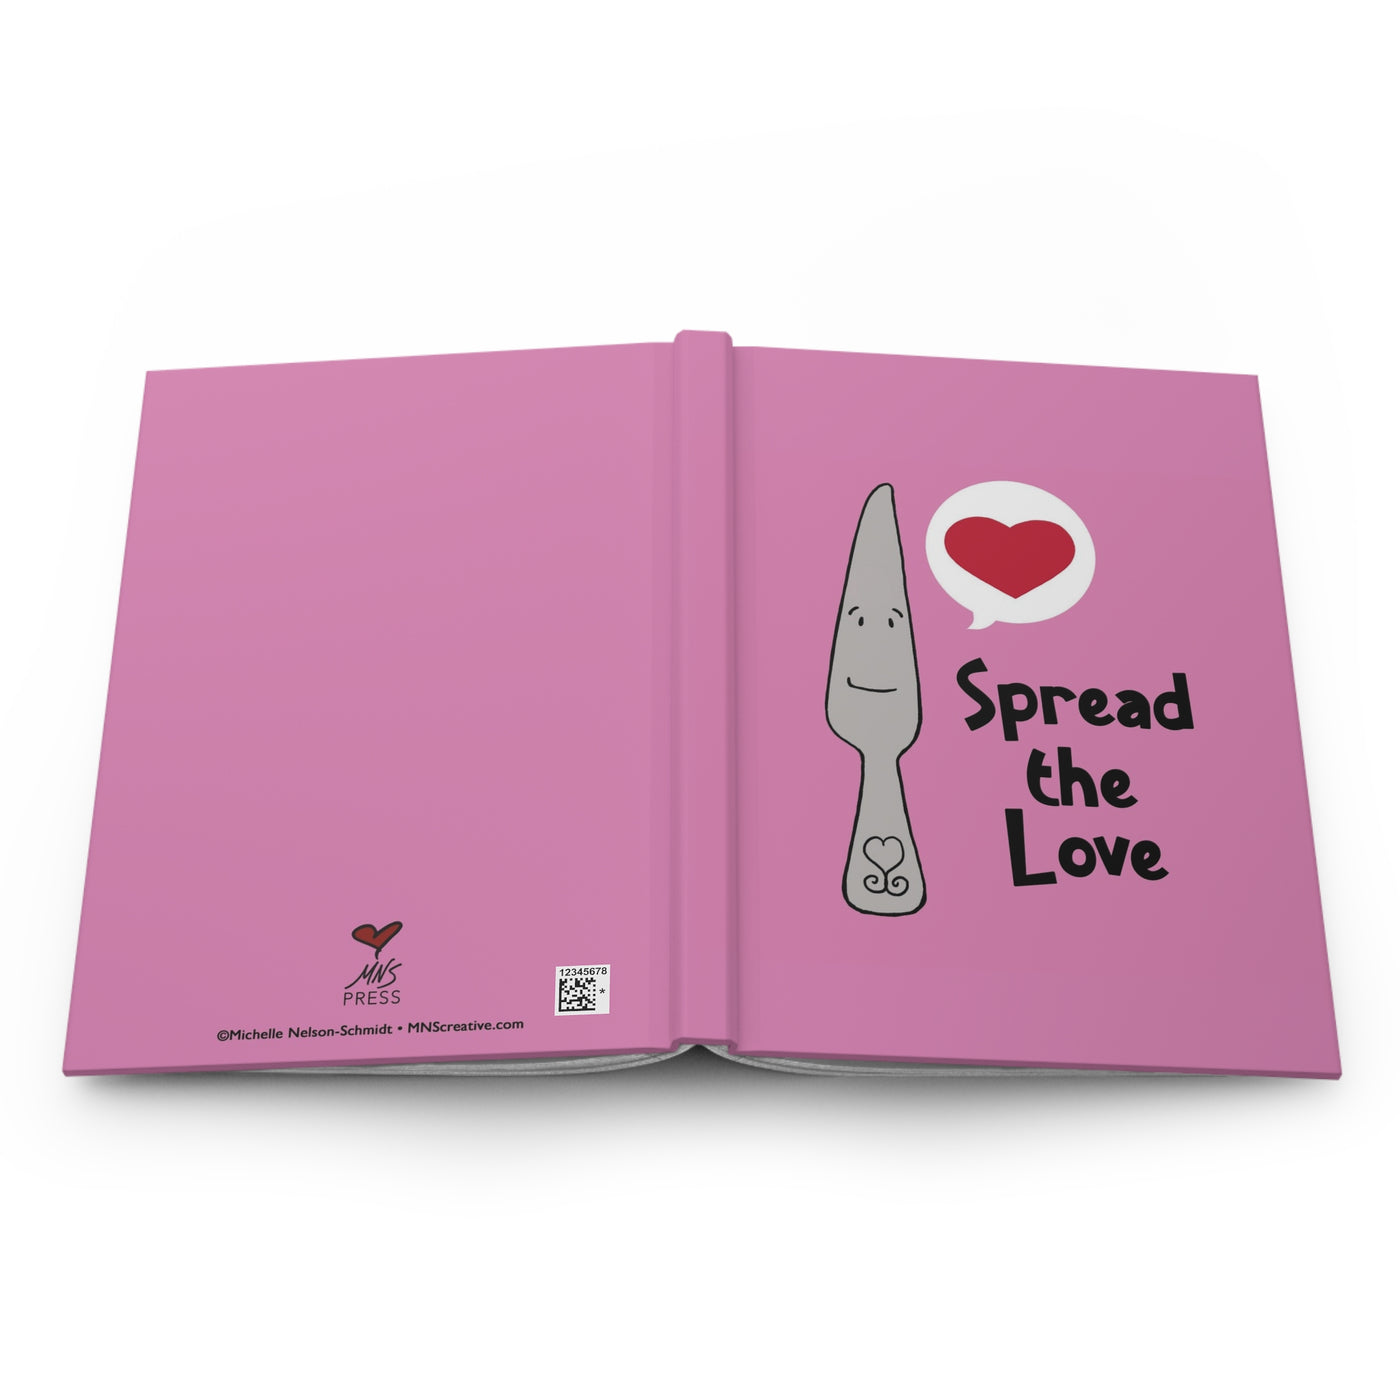 Spread the Love with Hardcover Journal Matte